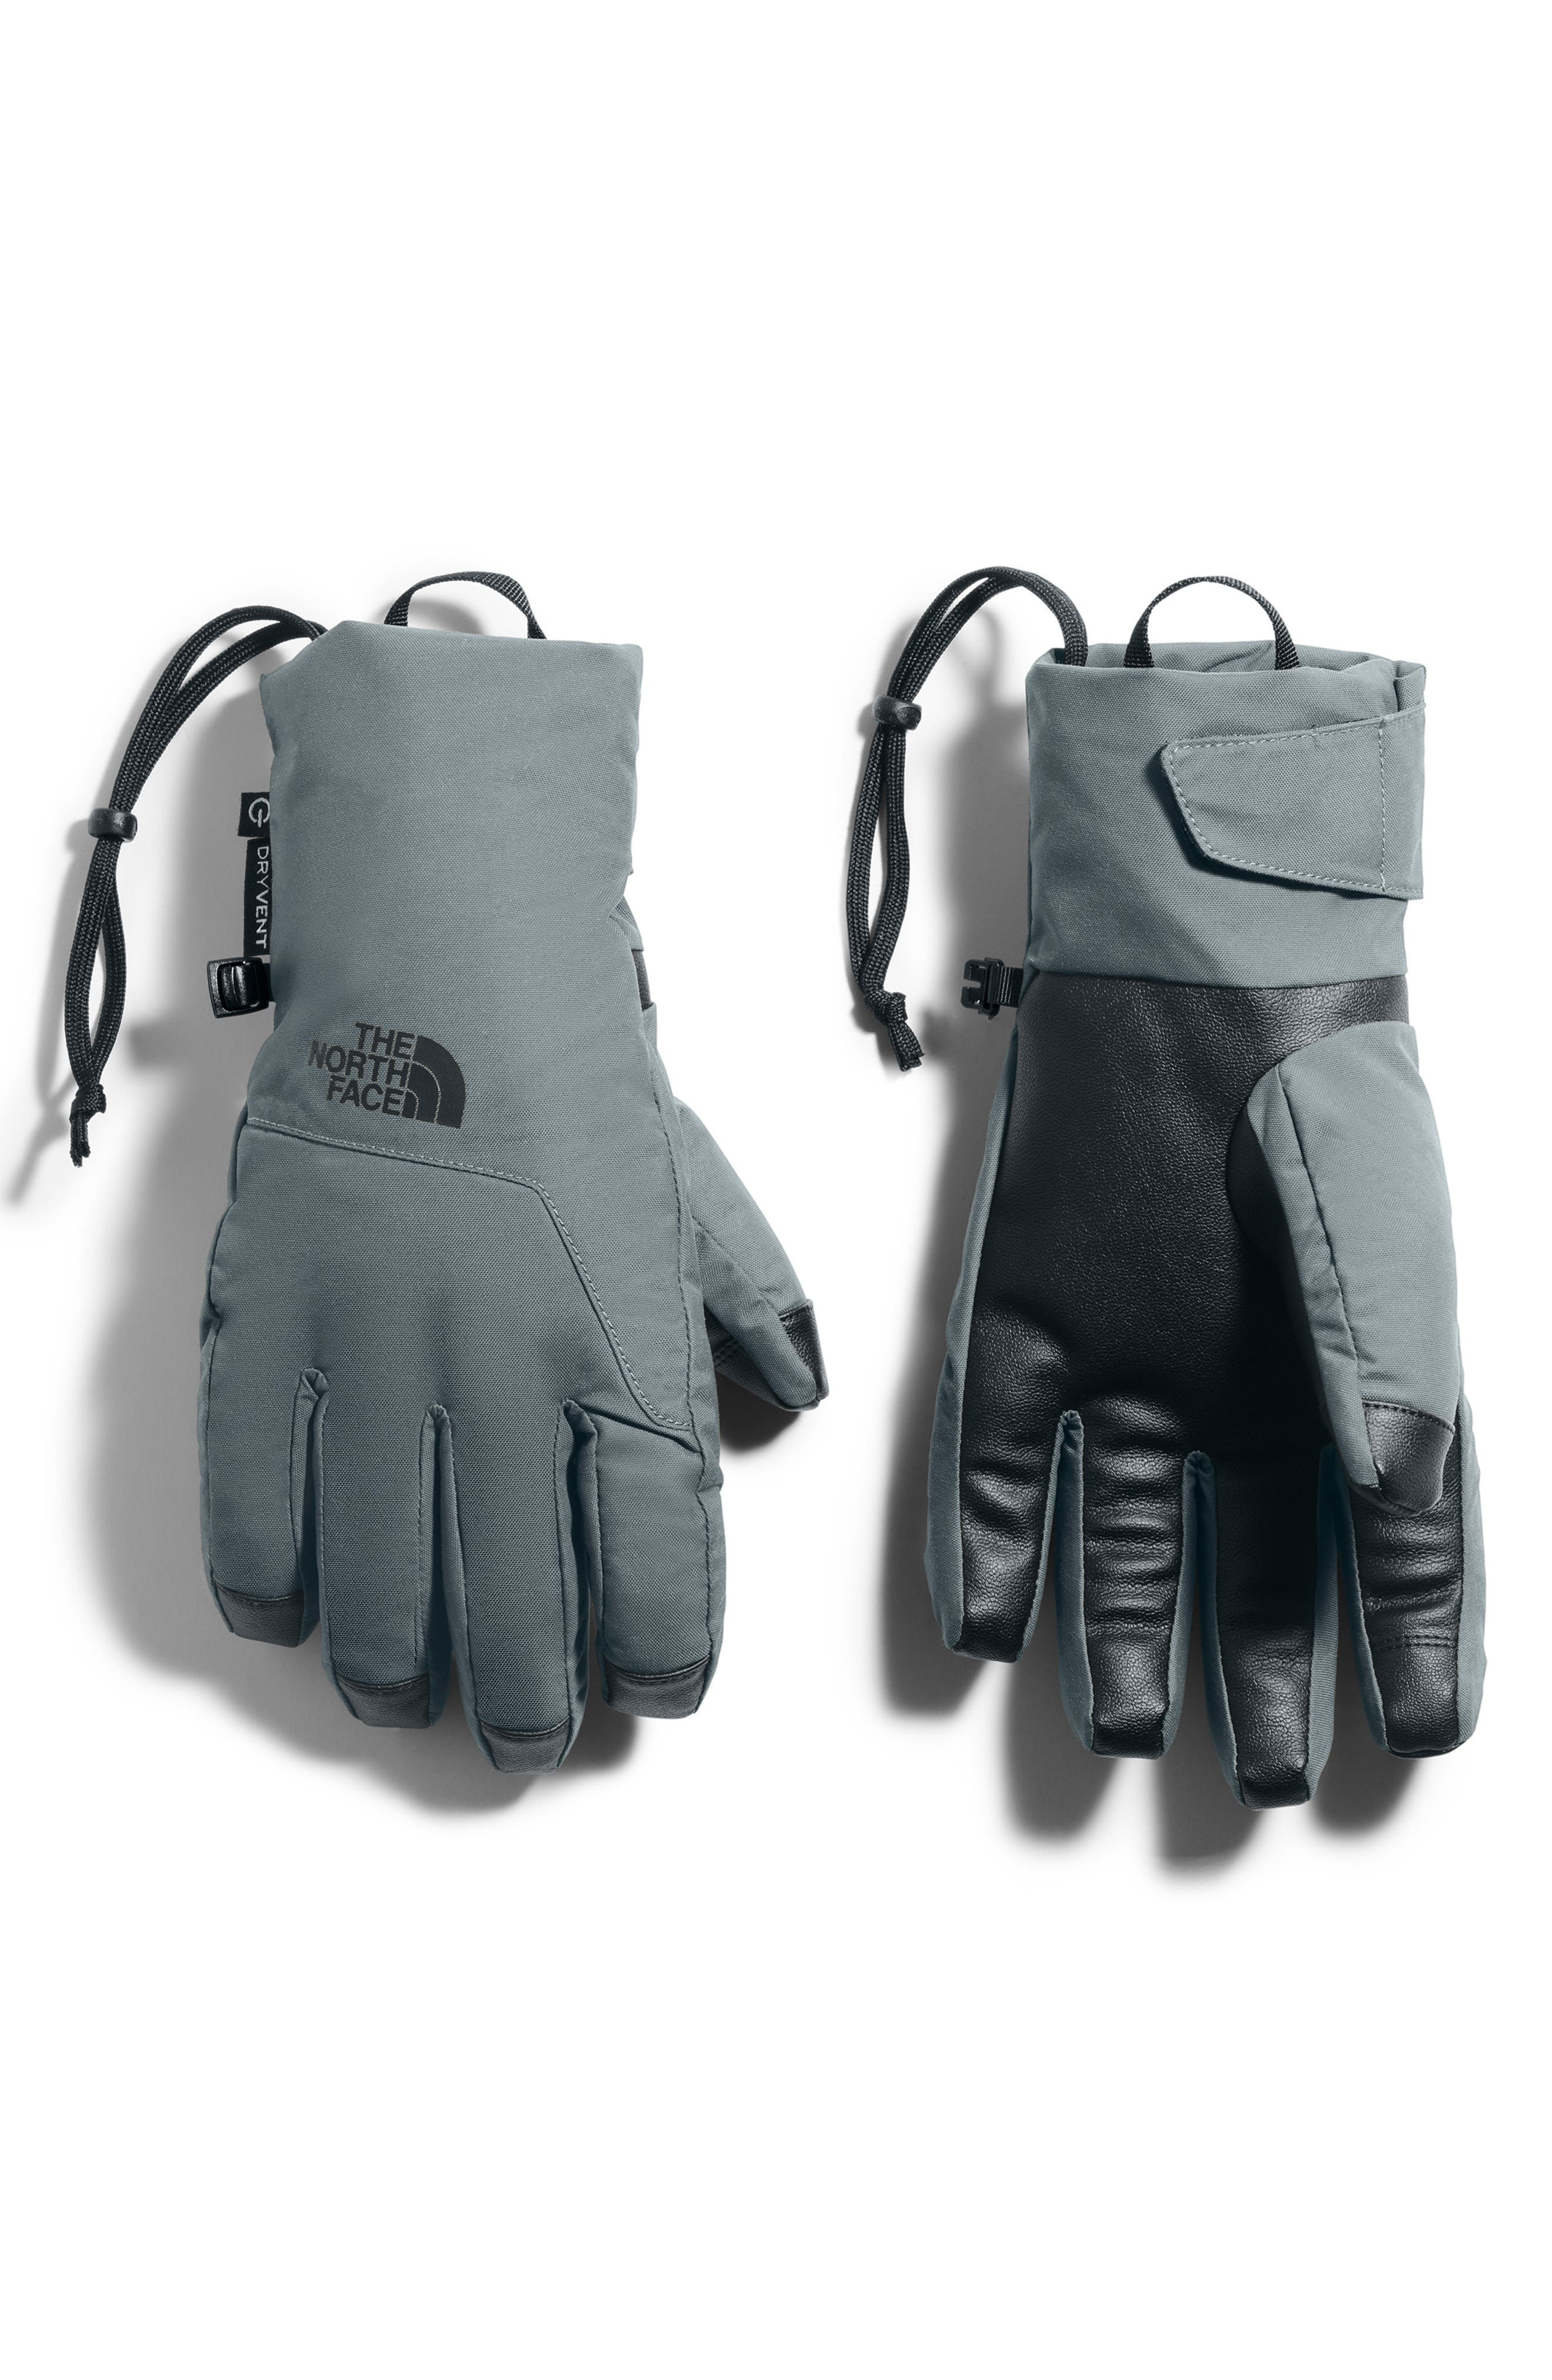 north face guardian gloves